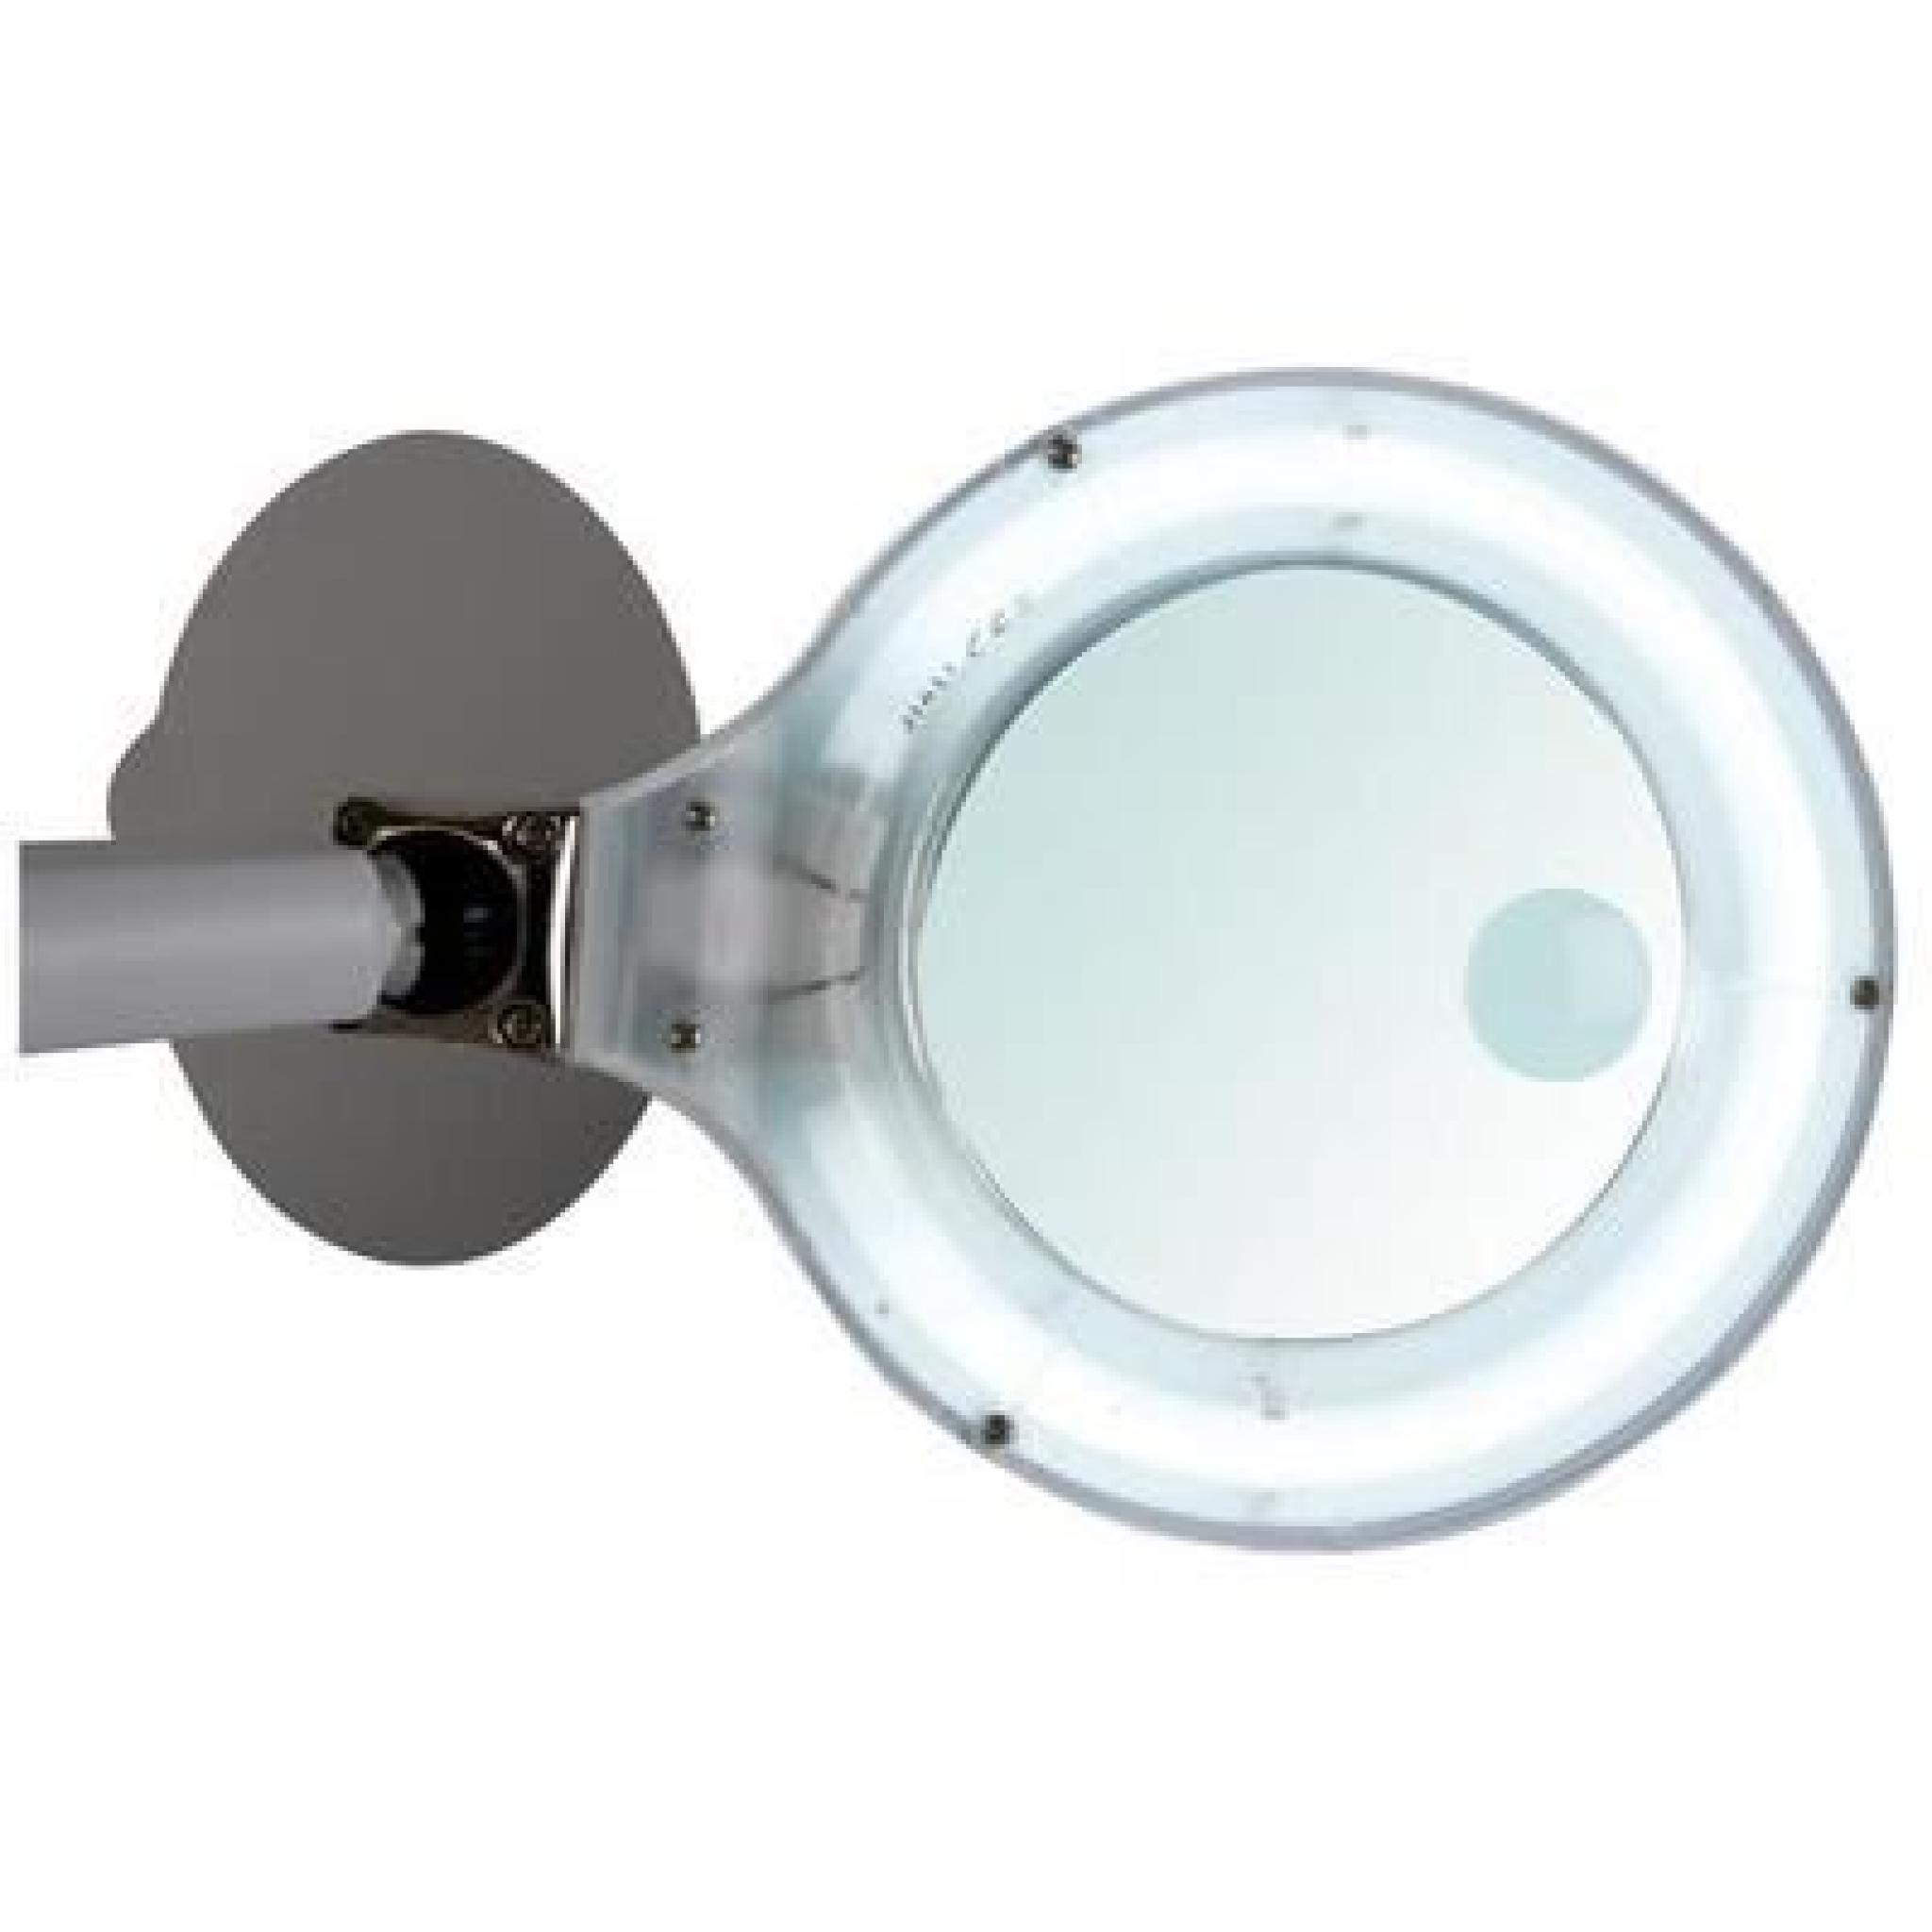 Lampe fluorescente ronde loupe 3 12 dioptries 12w pas cher